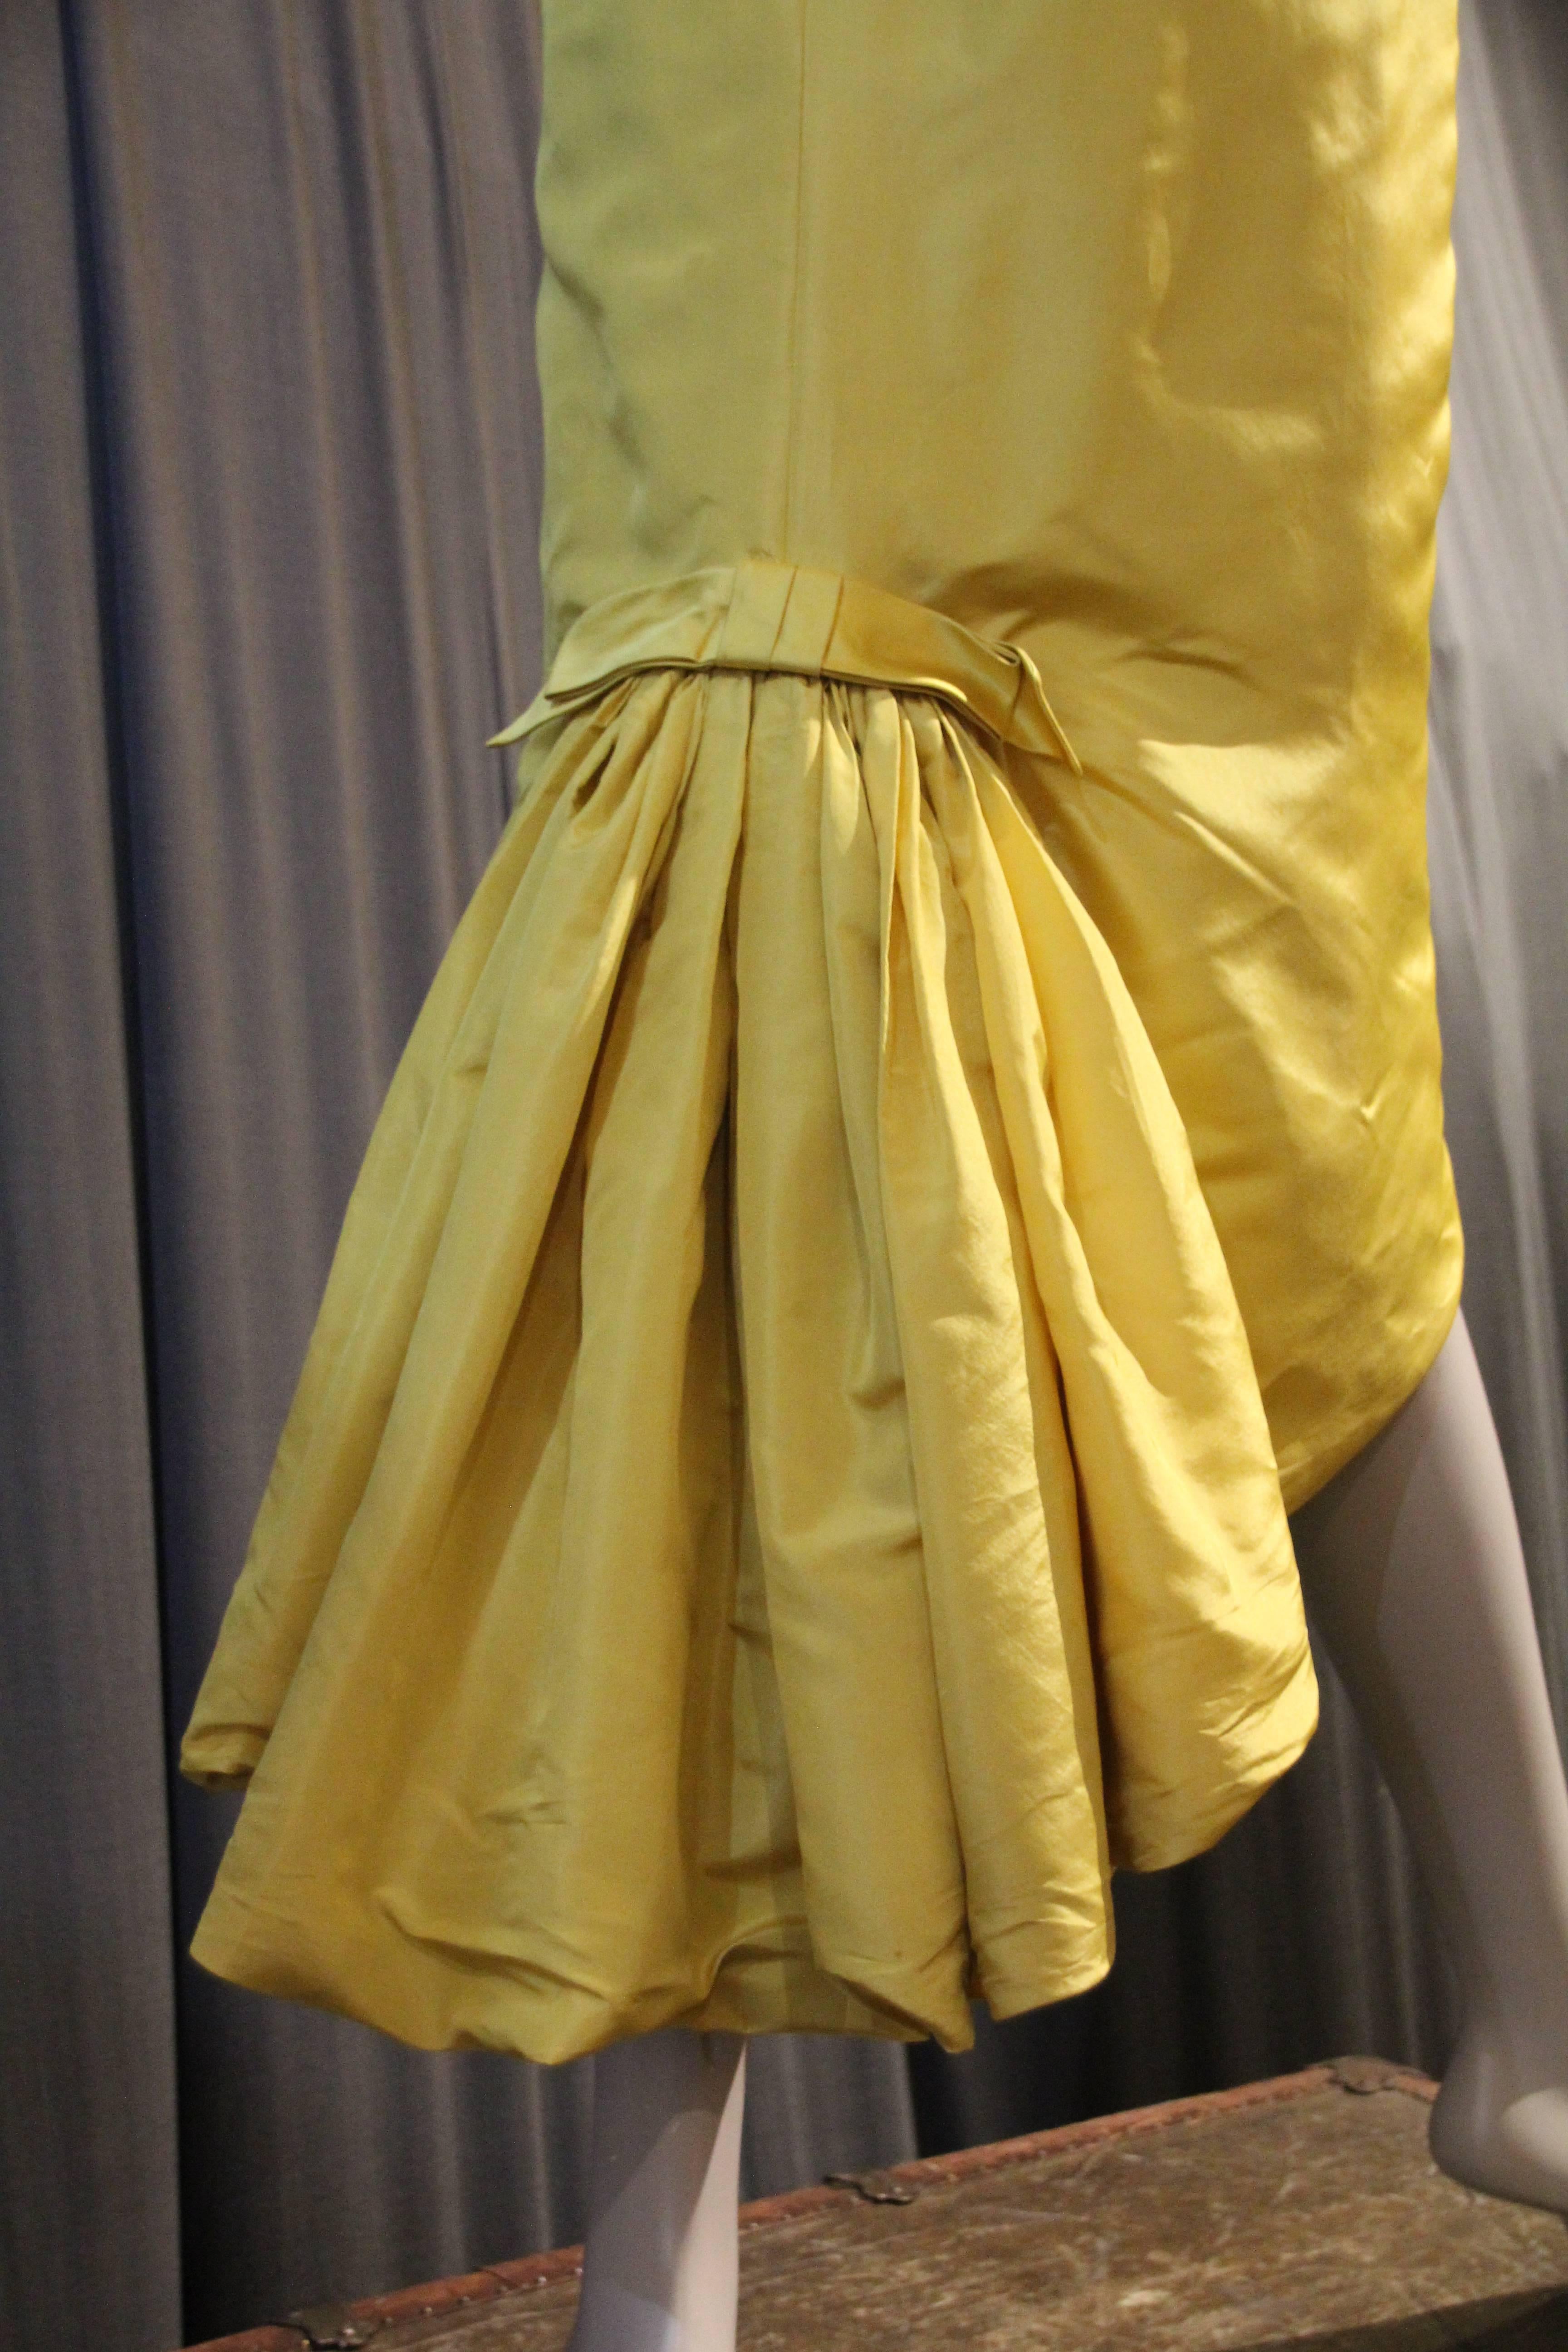 A wonderful late 1950s Philip Hulitar canary yellow silk cocktail dress with a pouf fishtail hem at back.  Satin and matte silk combined in this sophisticated spaghetti strap, form-fitting sheath. front hem is angled up to a point at center. 